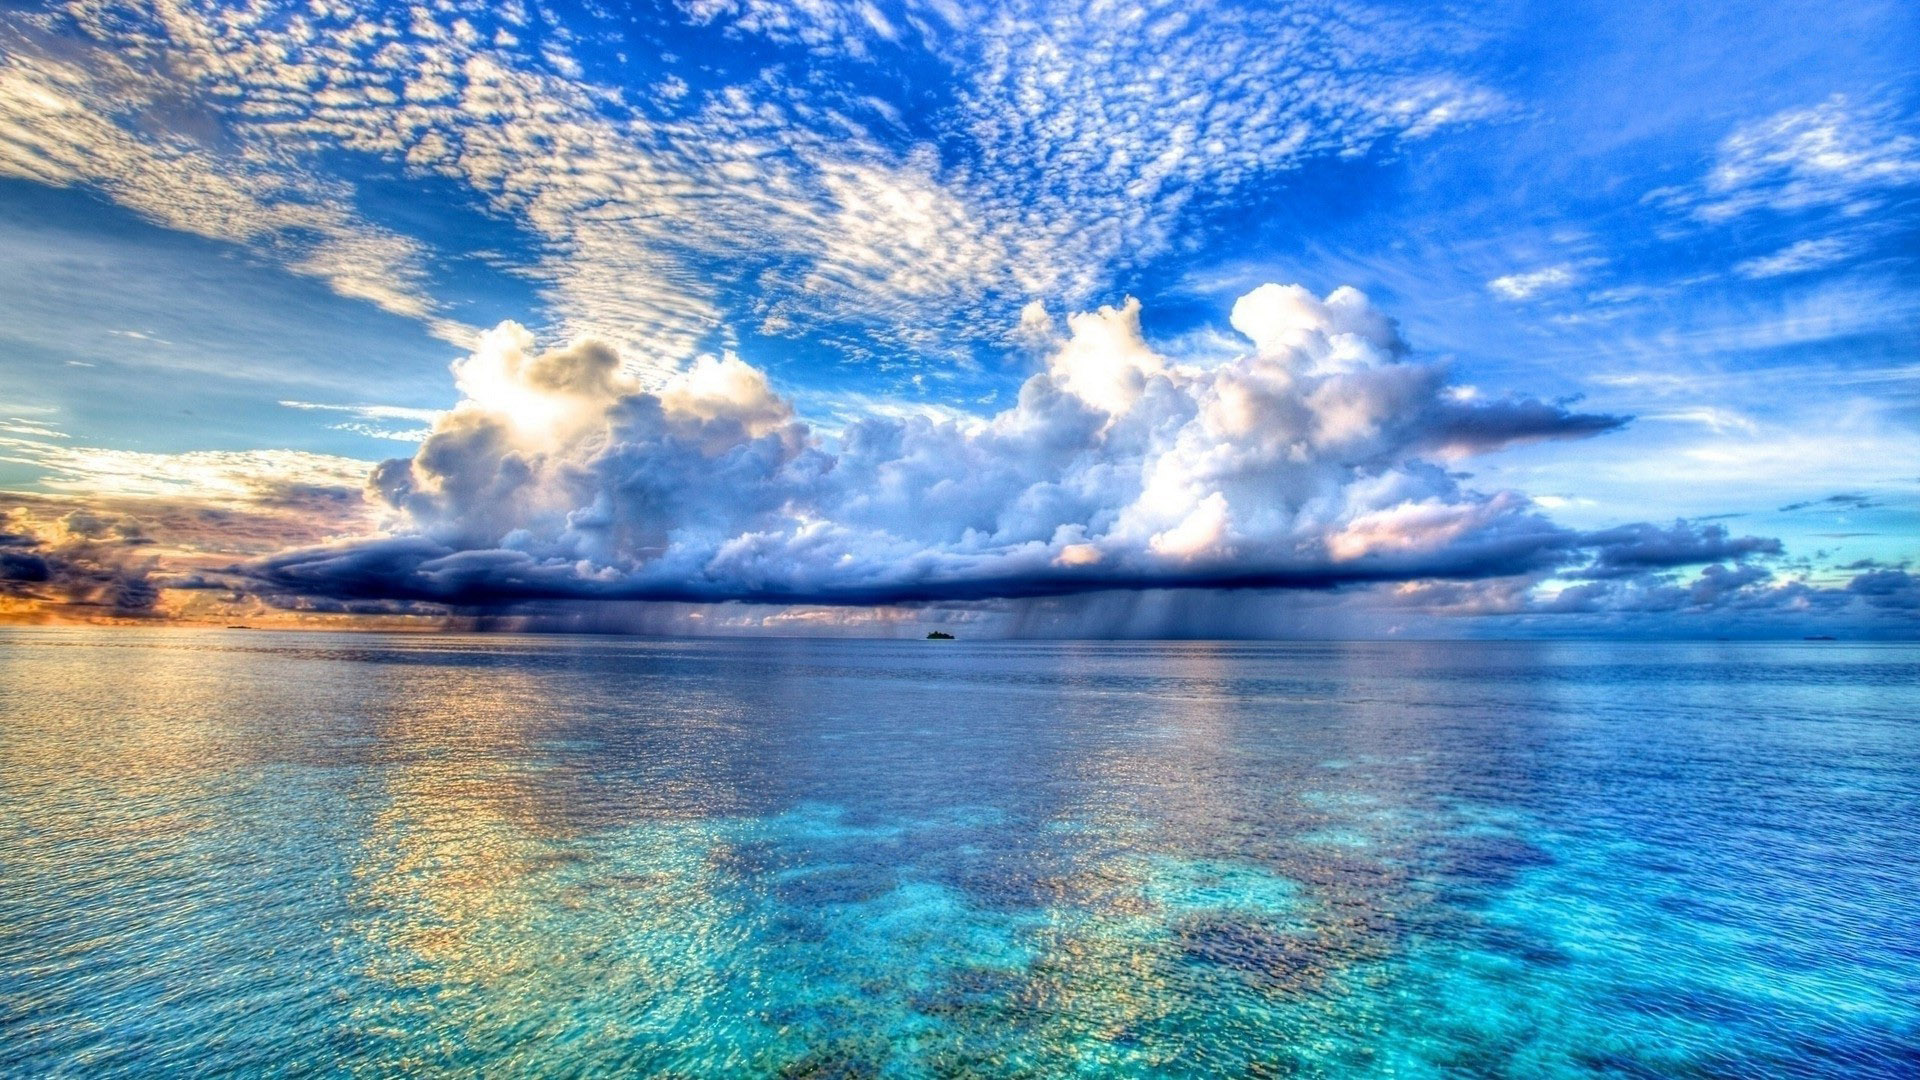 Beautiful Sky And Beach Wallpaper Download Wallpaper with 1920x1080 1920x1080